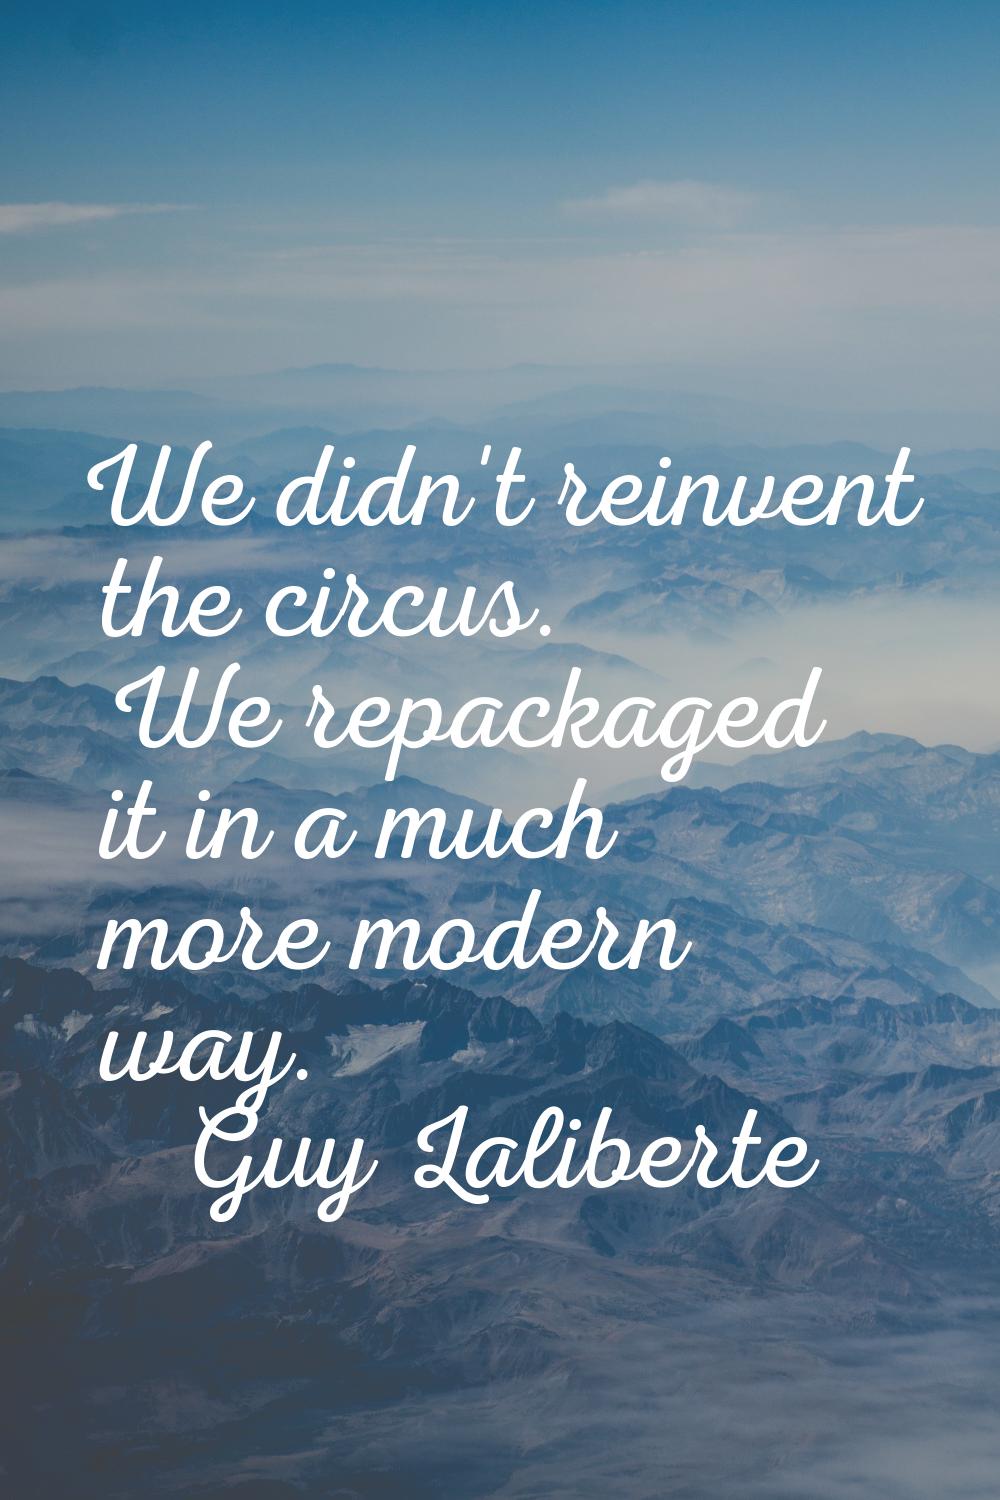 We didn't reinvent the circus. We repackaged it in a much more modern way.